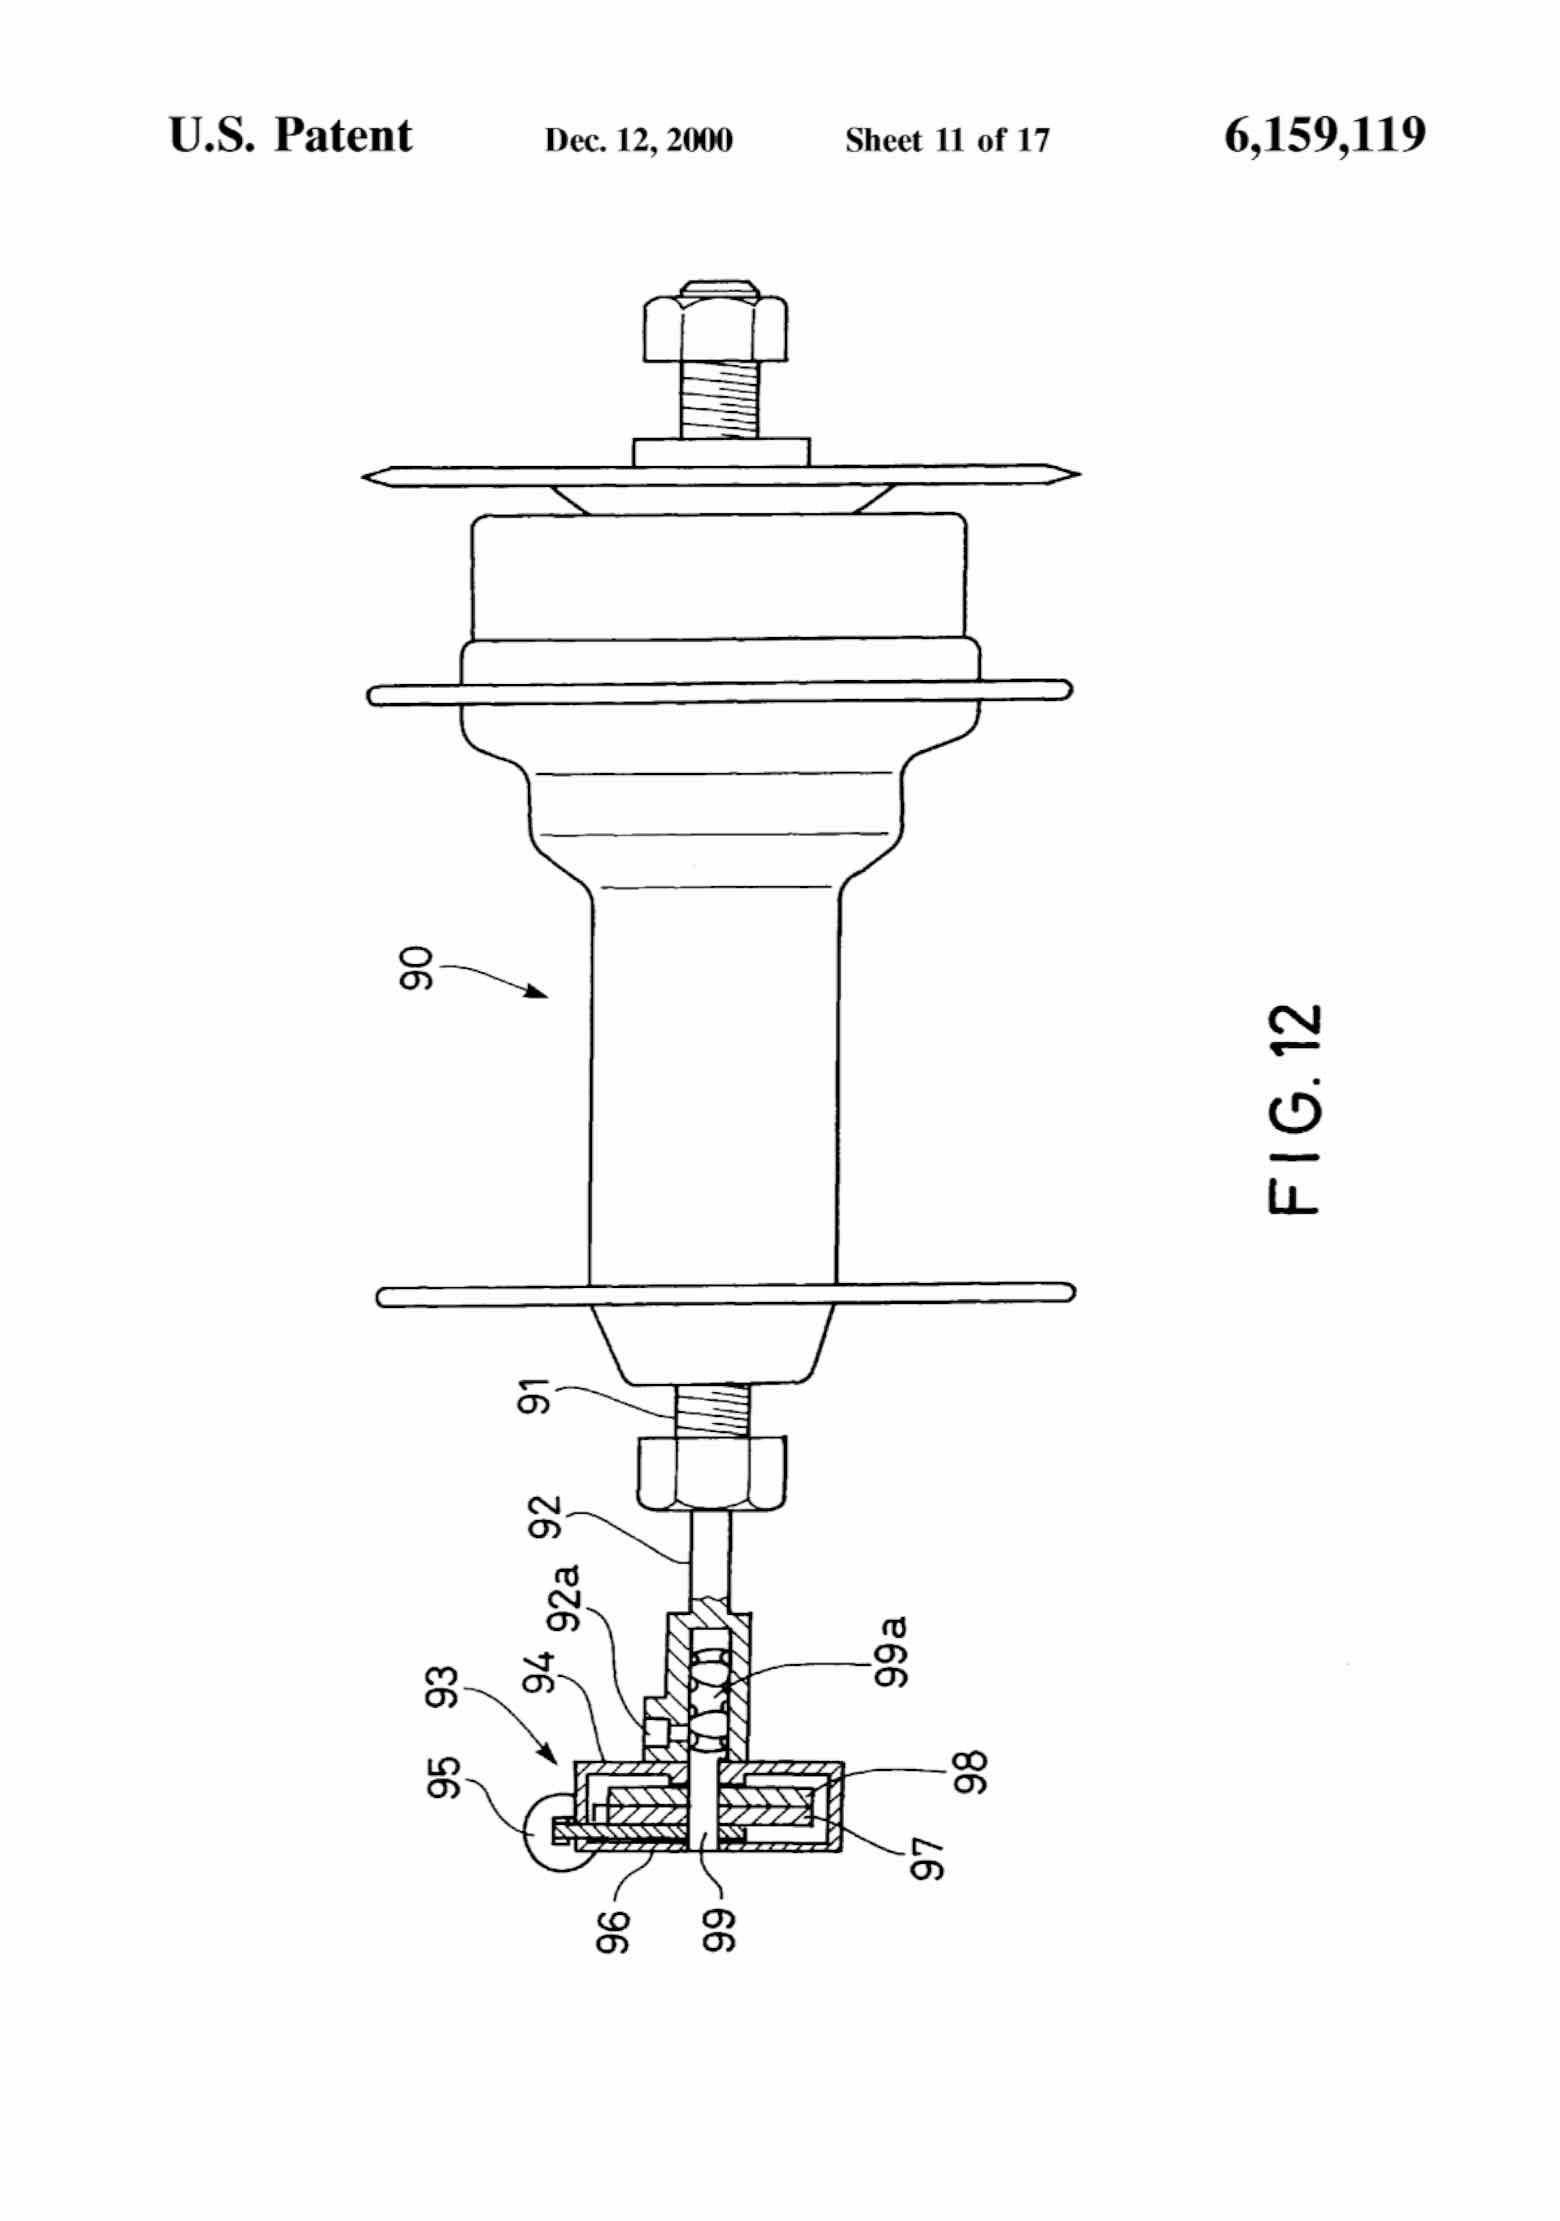 US Patent 6,159,119 - Shimano AirLines scan 12 main image